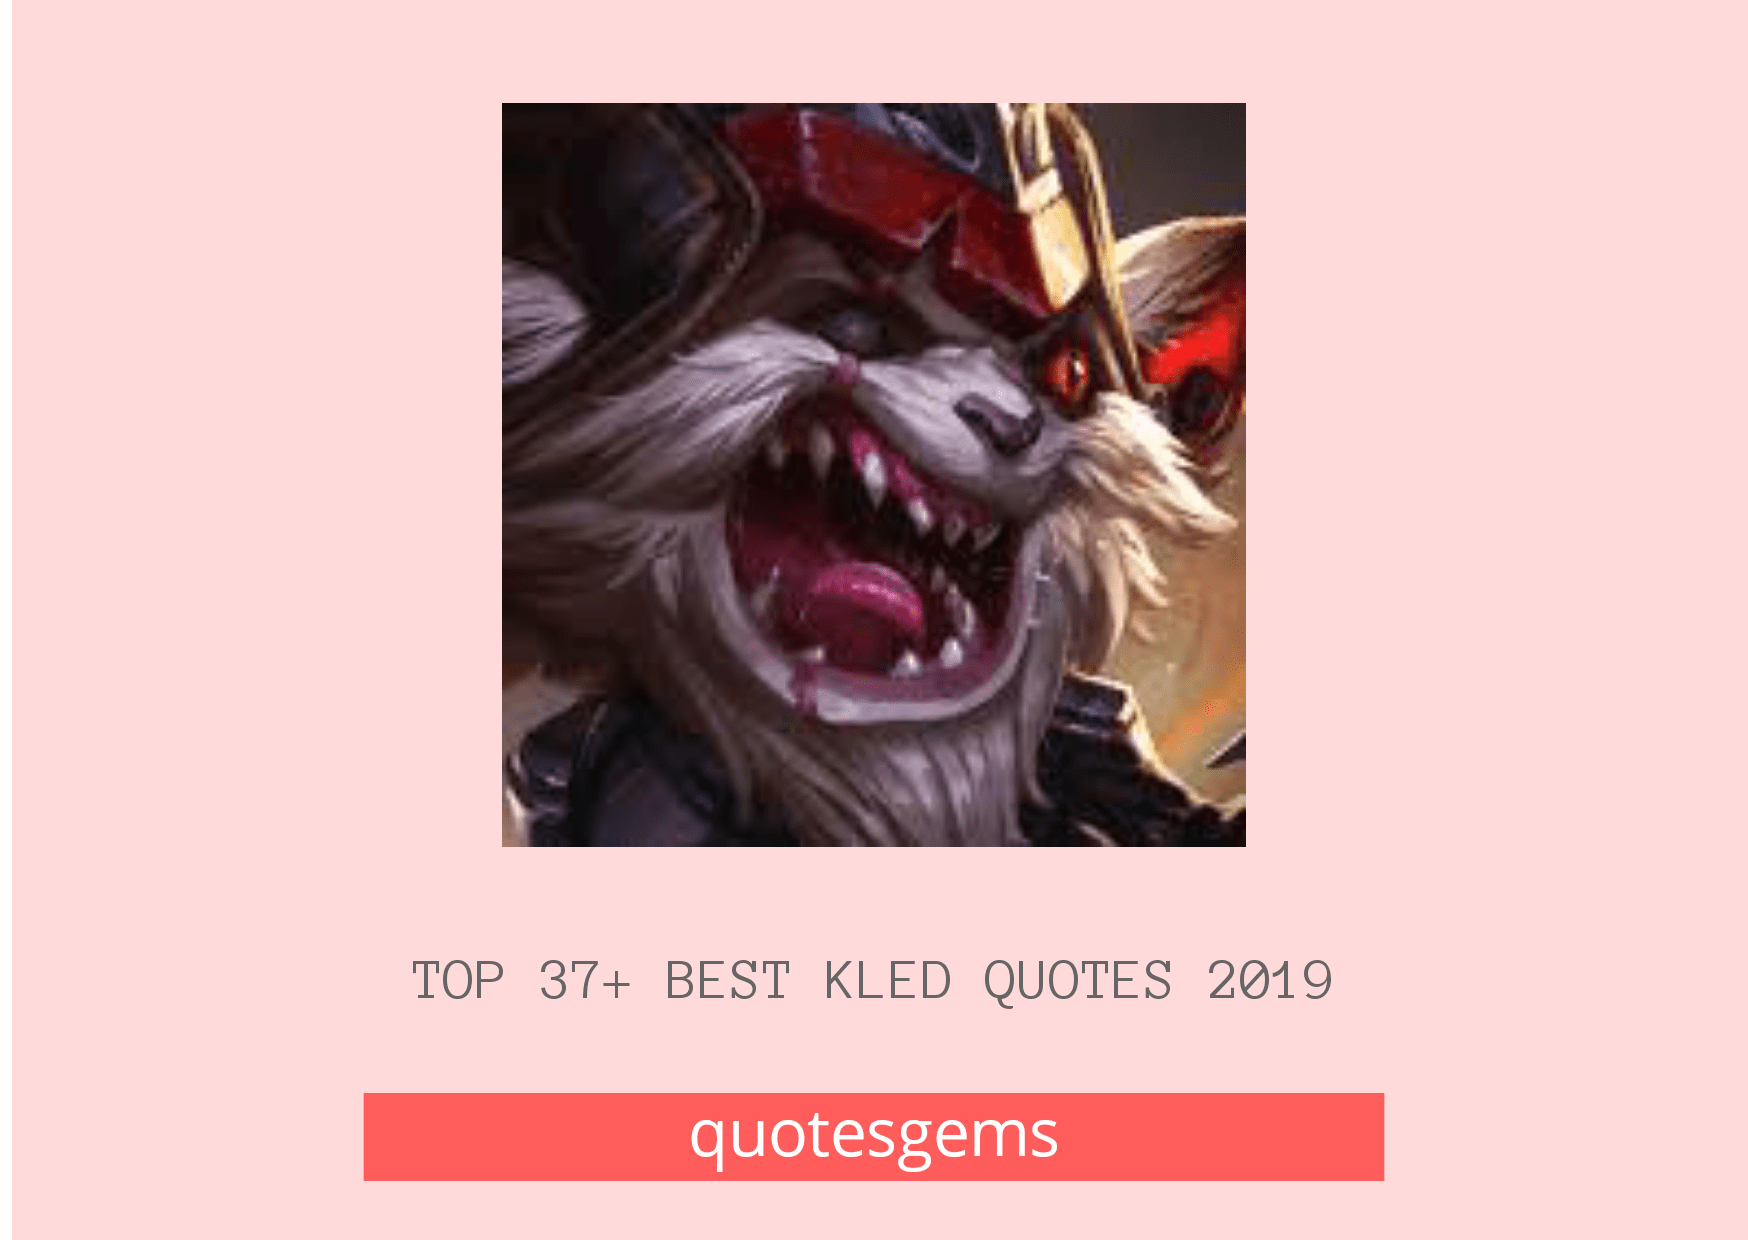 Kled Quotes